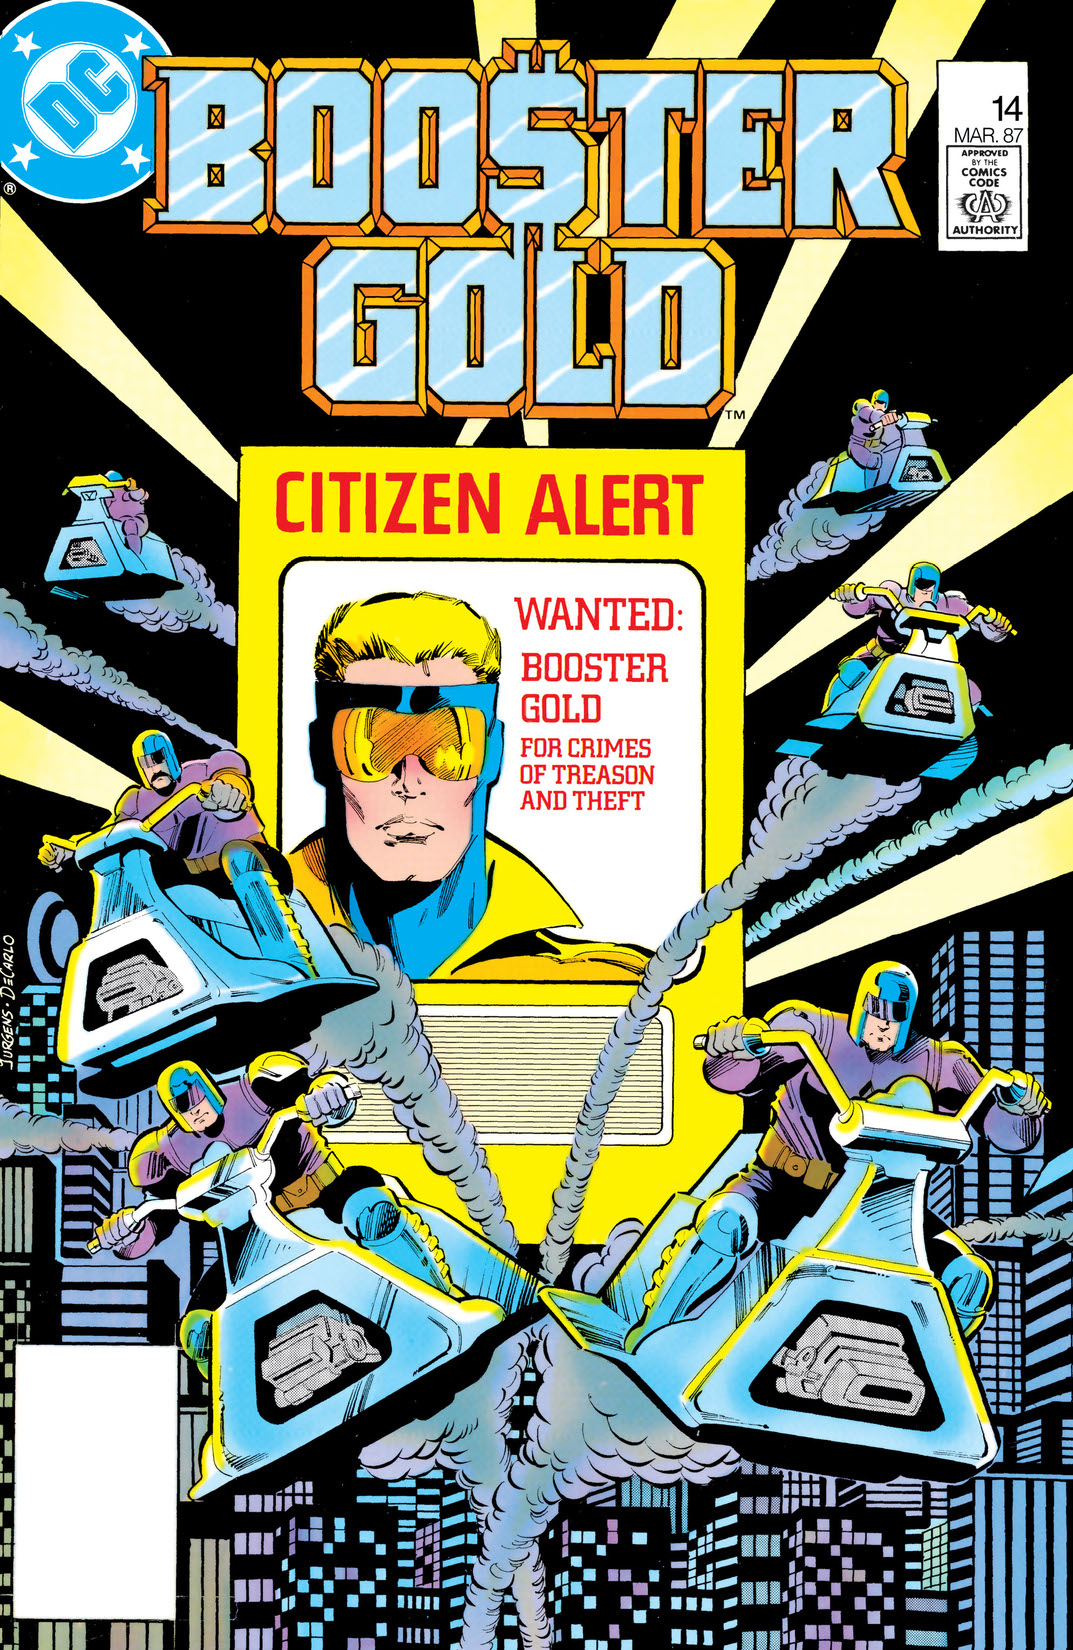 Booster Gold (1985-) #14 preview images